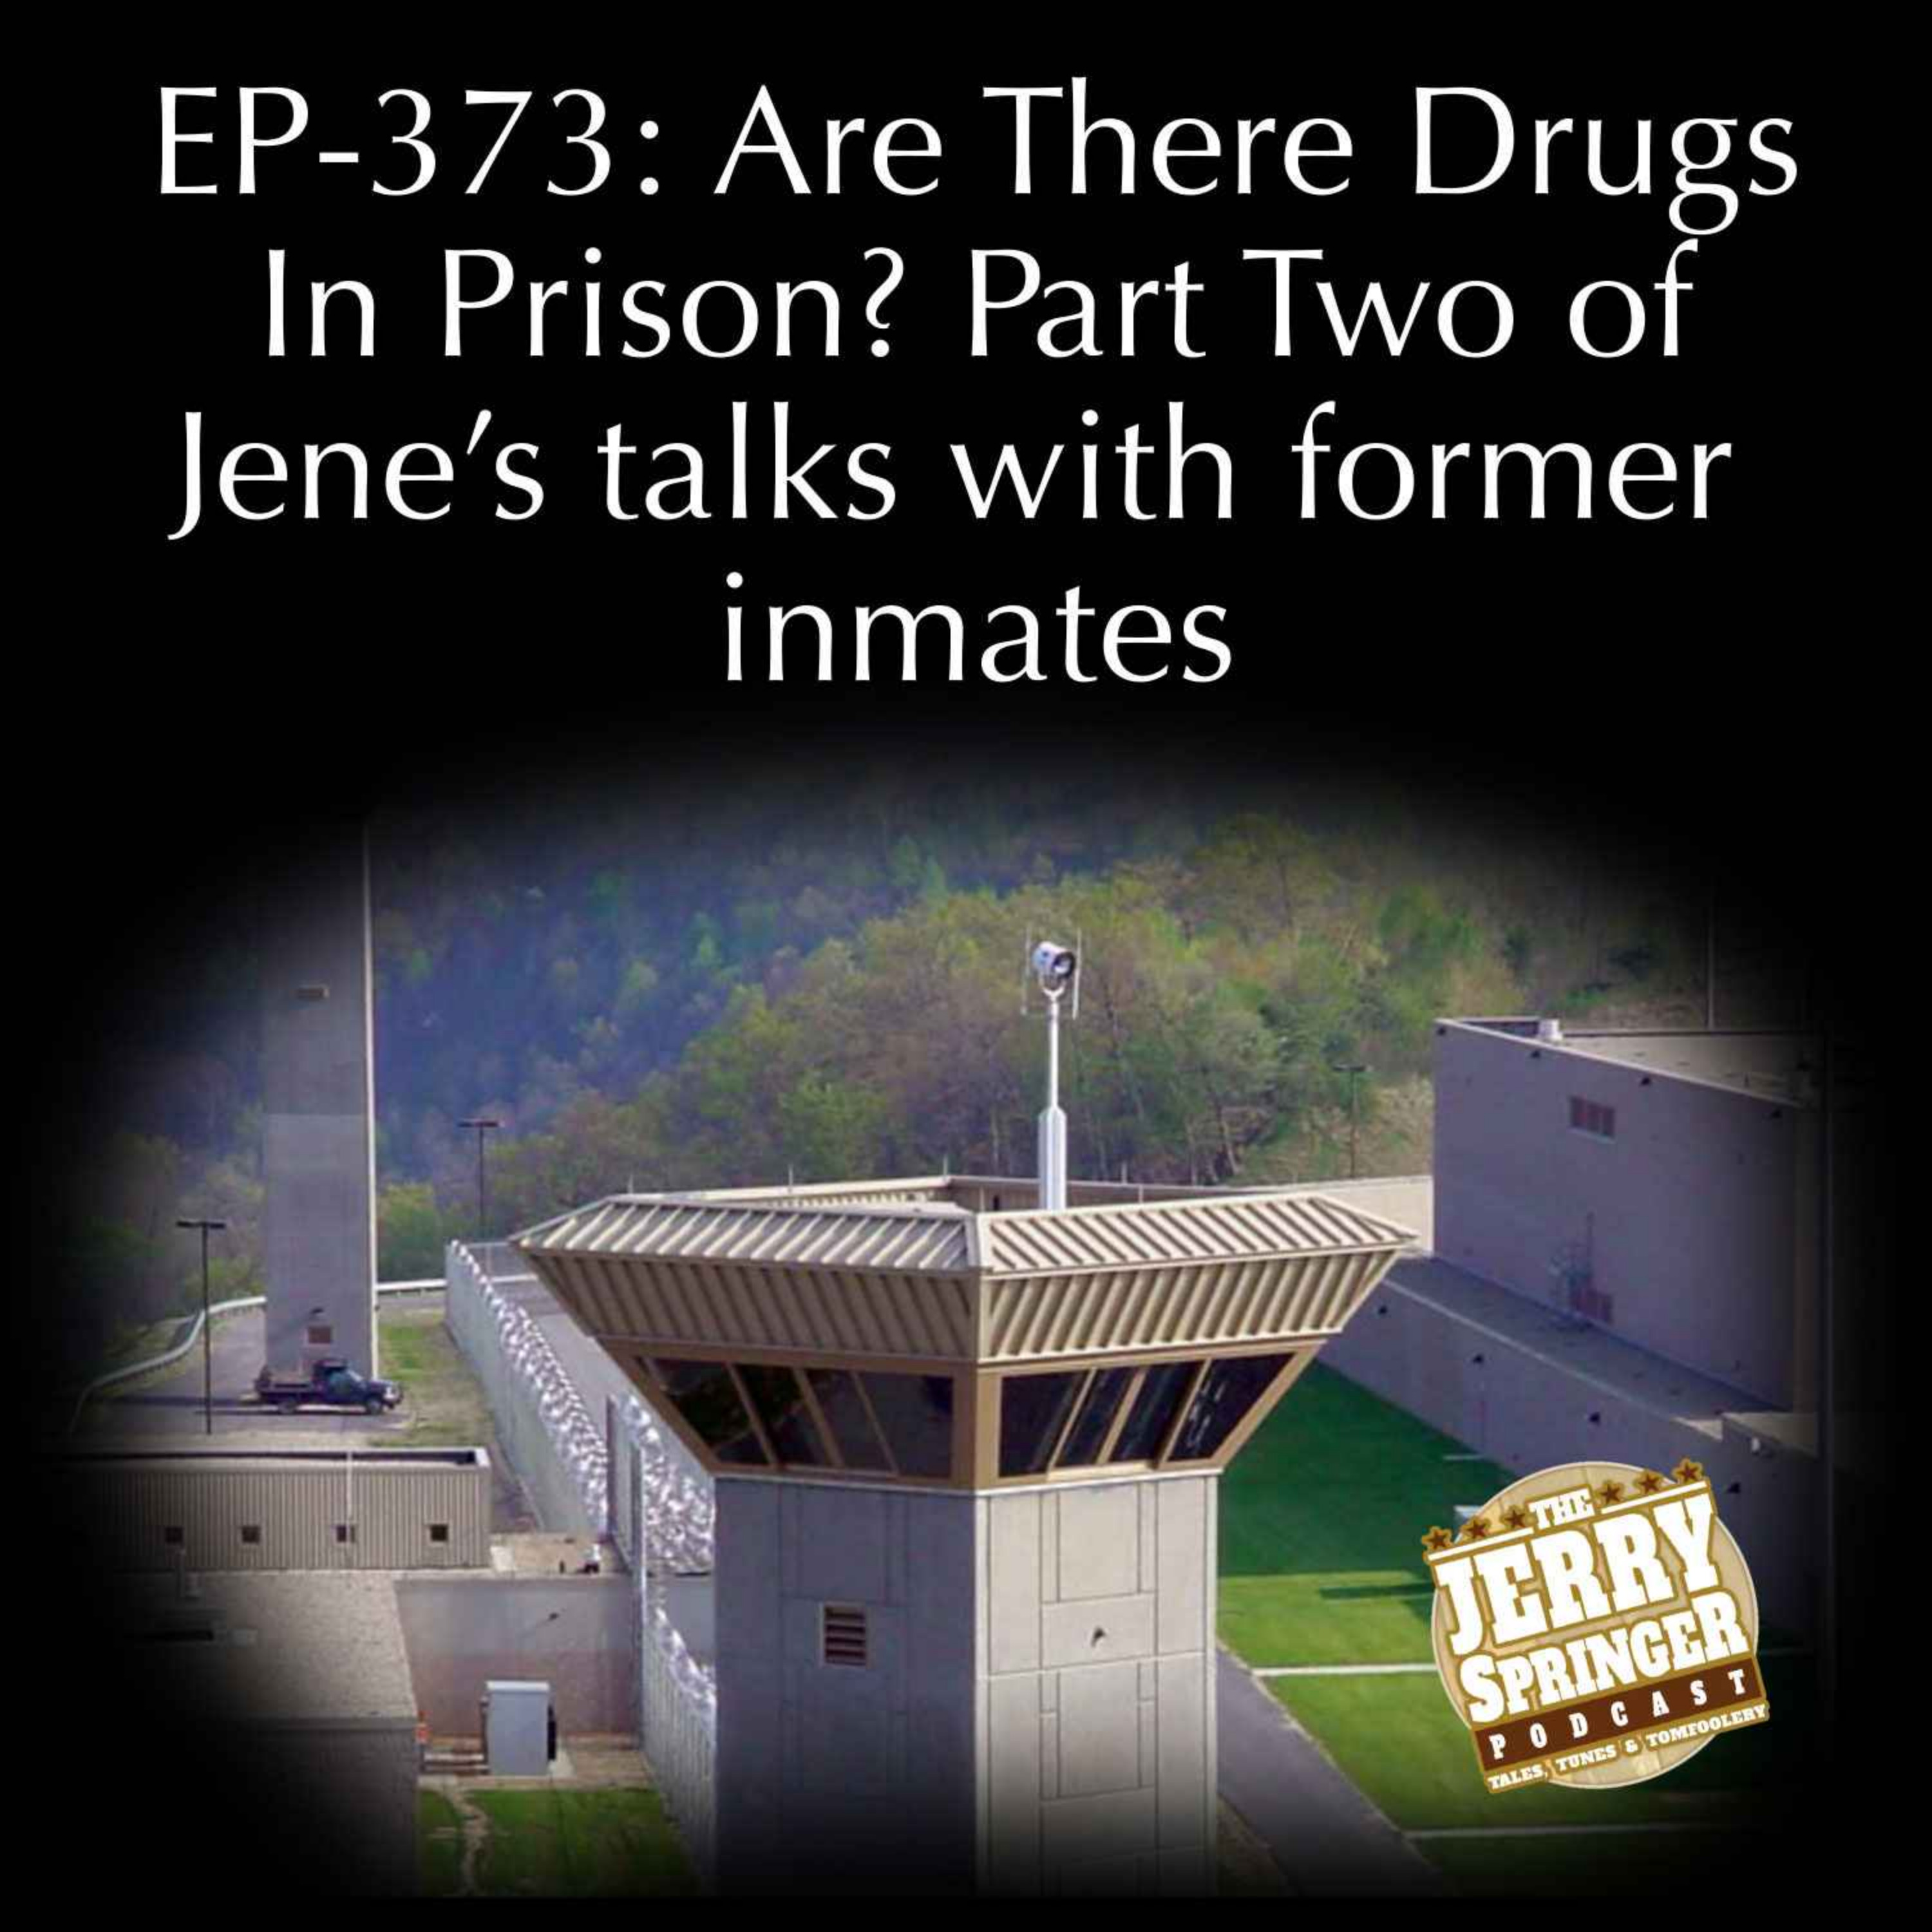 Are There Drugs in Prison? Part 2 of Jene’s Talks with former inmates: EP-373